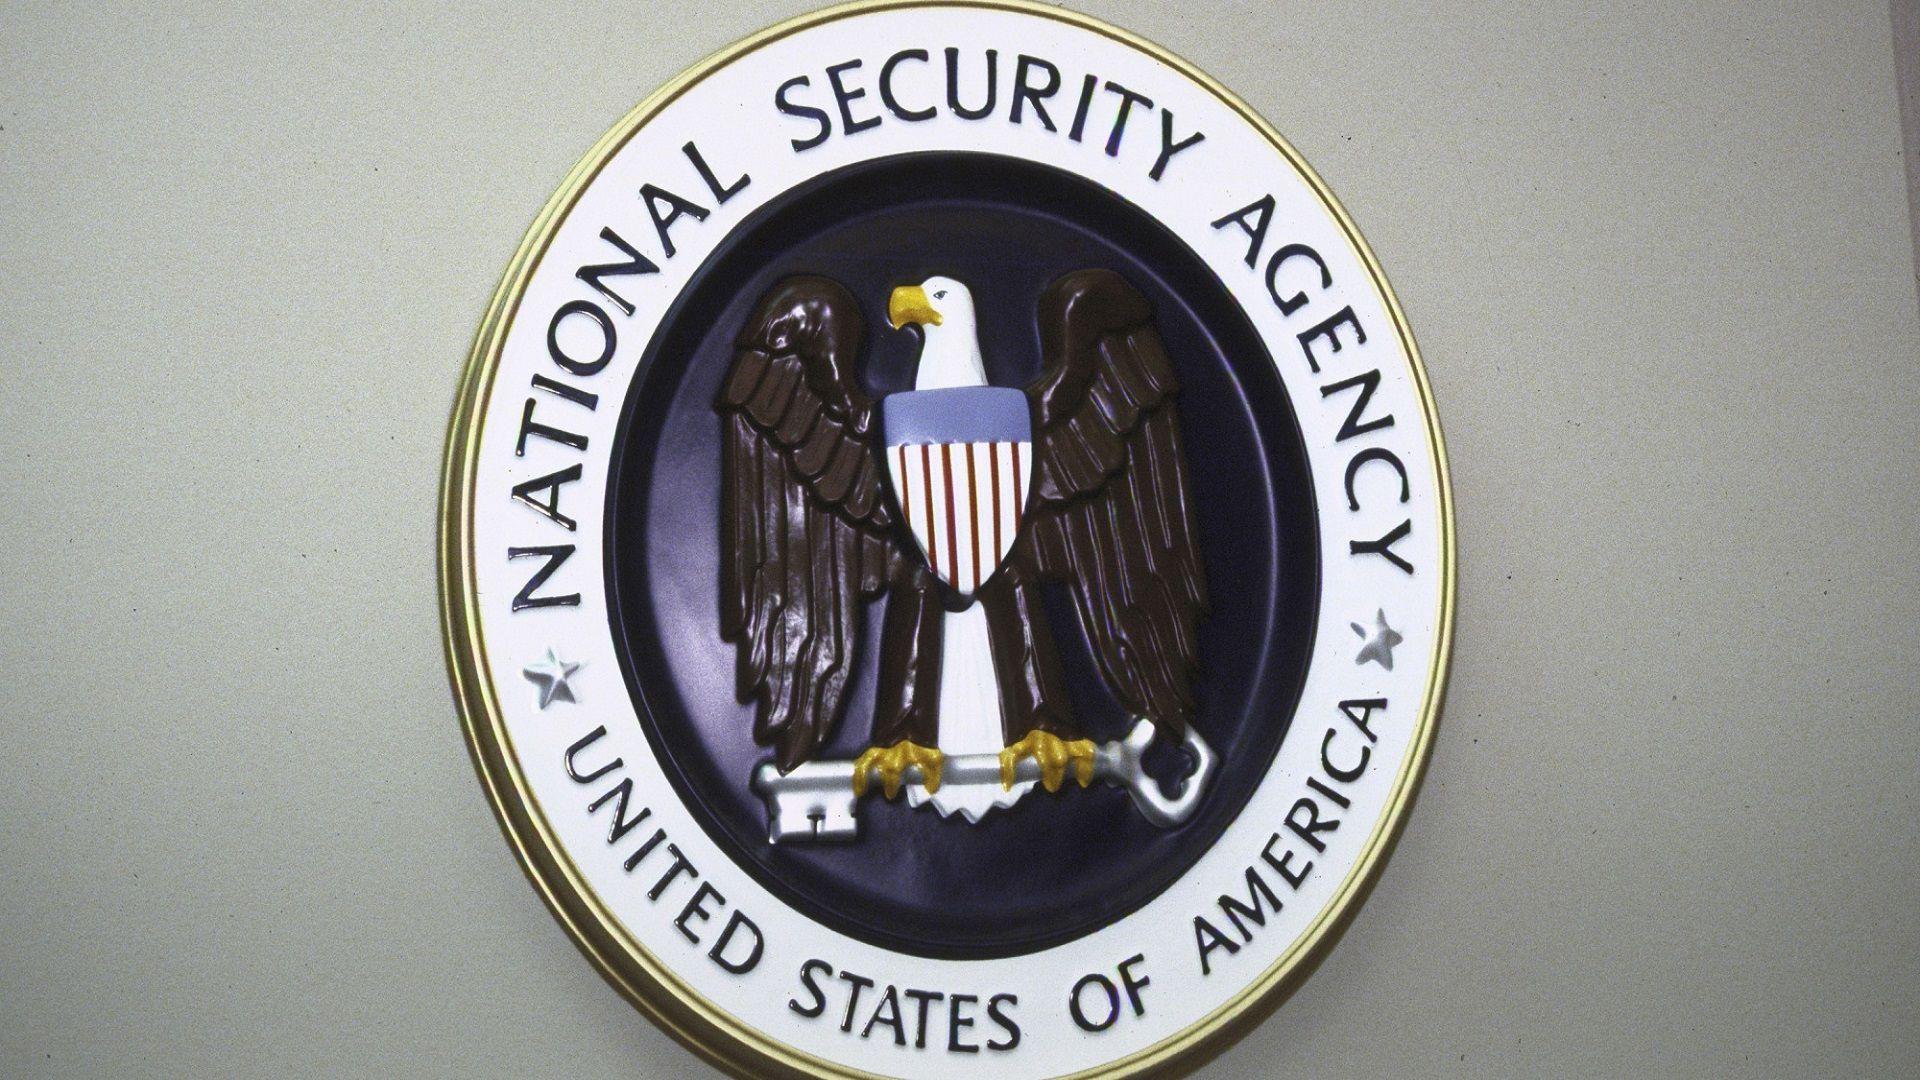 National Security Agency seal hanging on